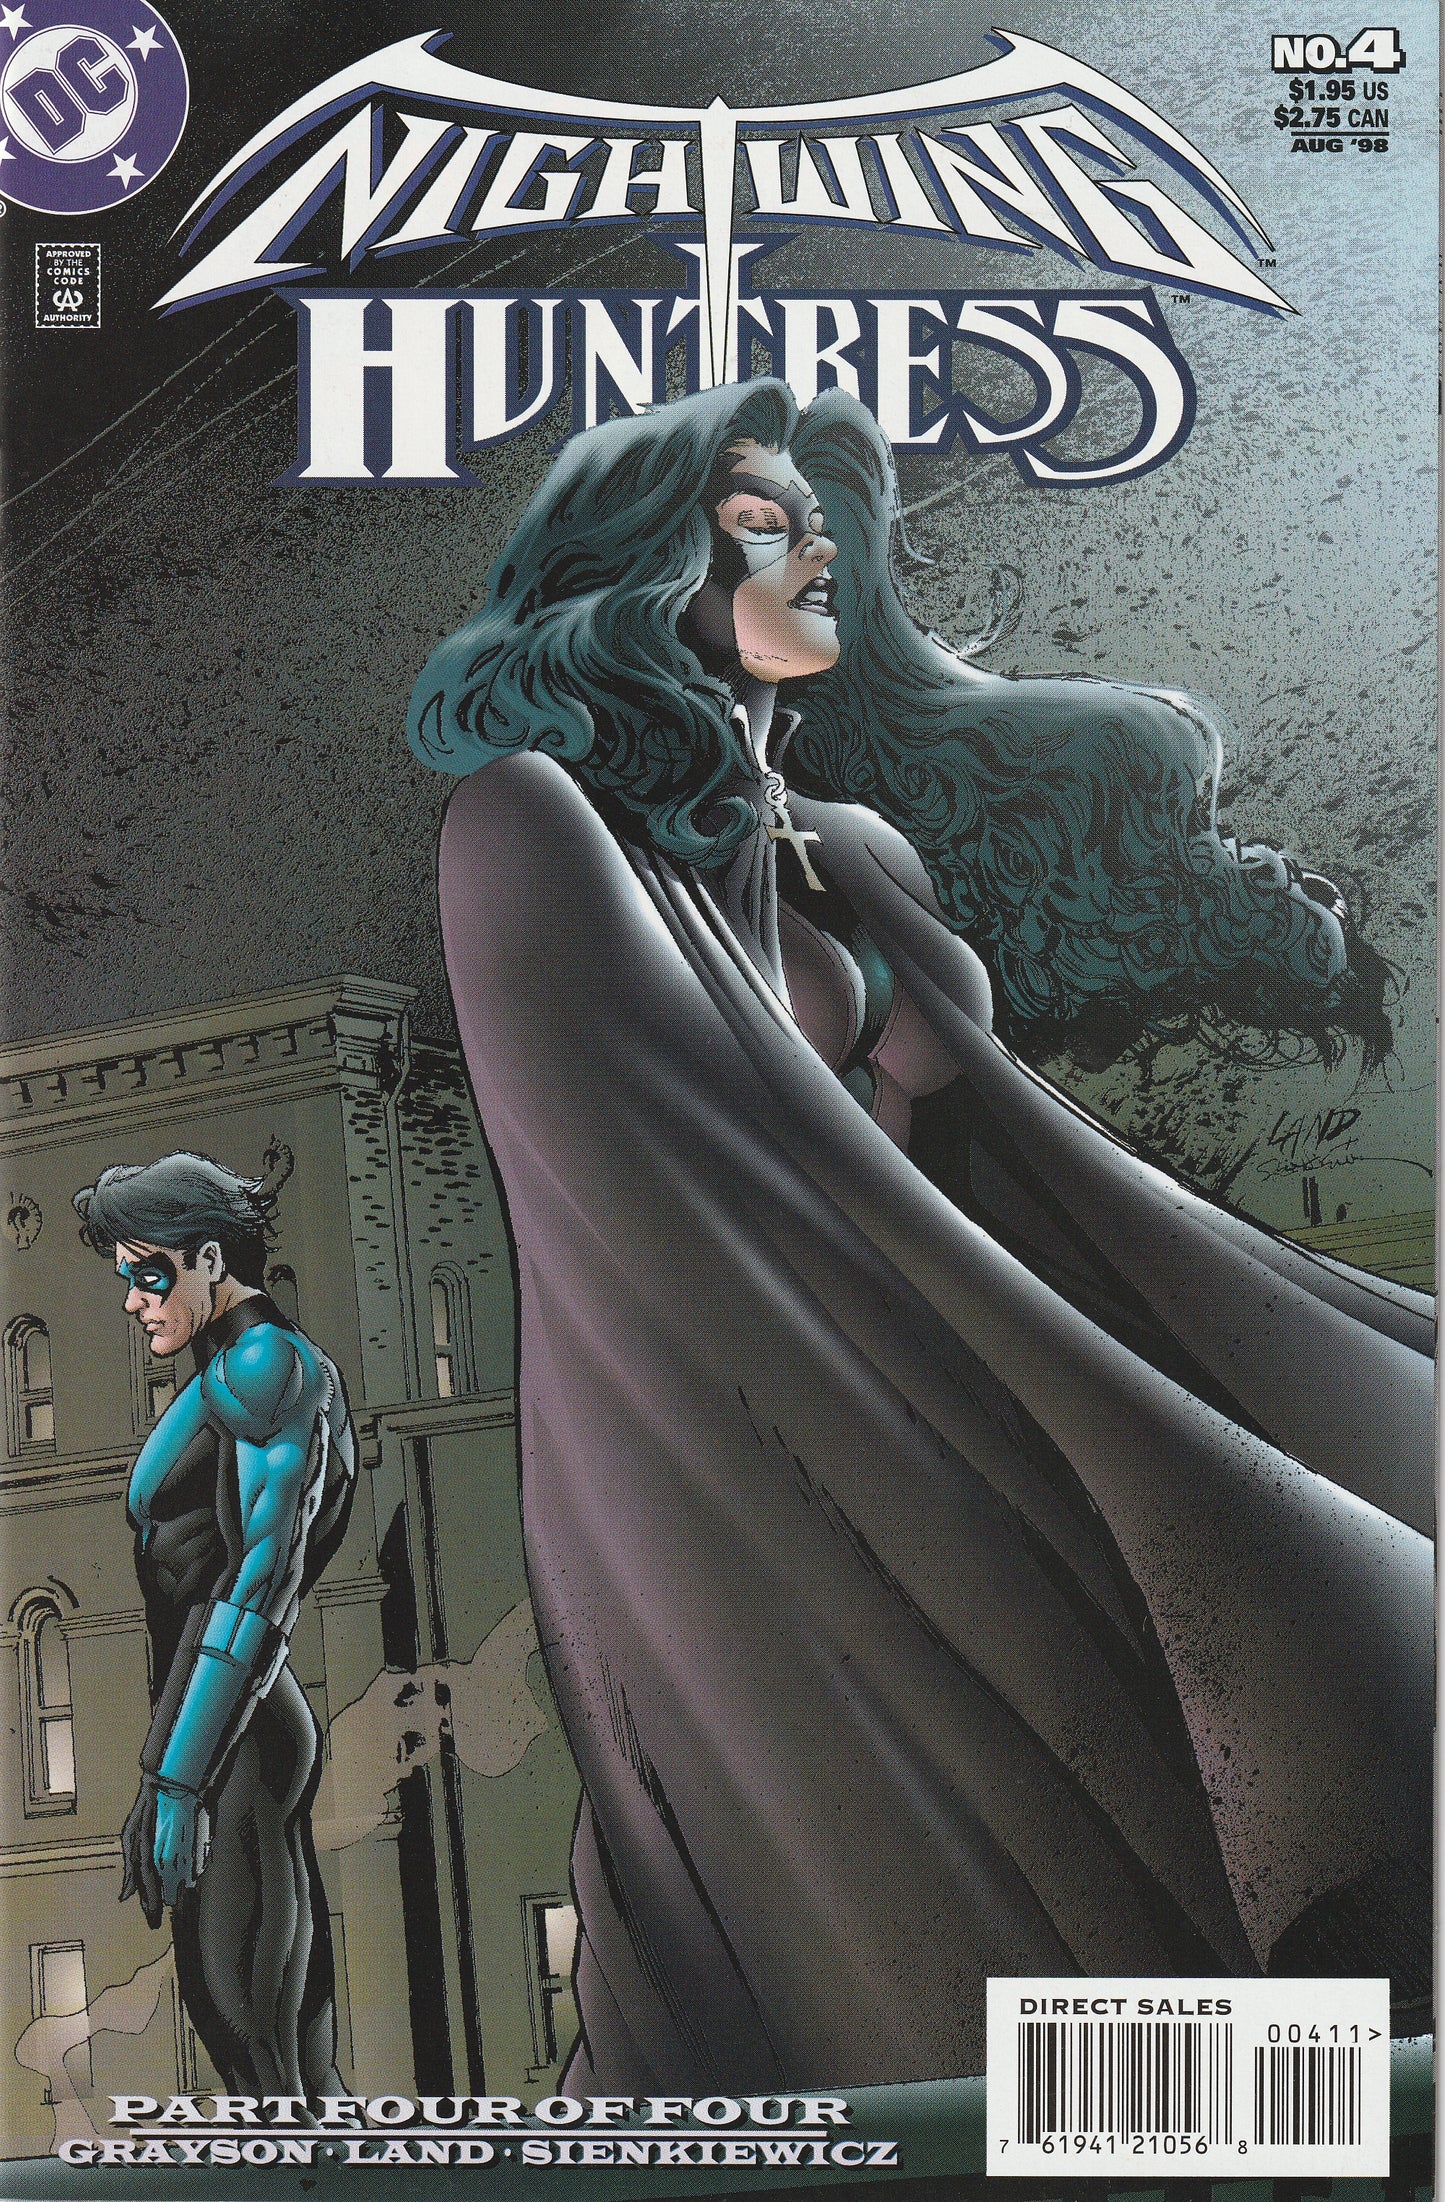 Nightwing & Huntress (1998) - Complete 4 issue mini-series